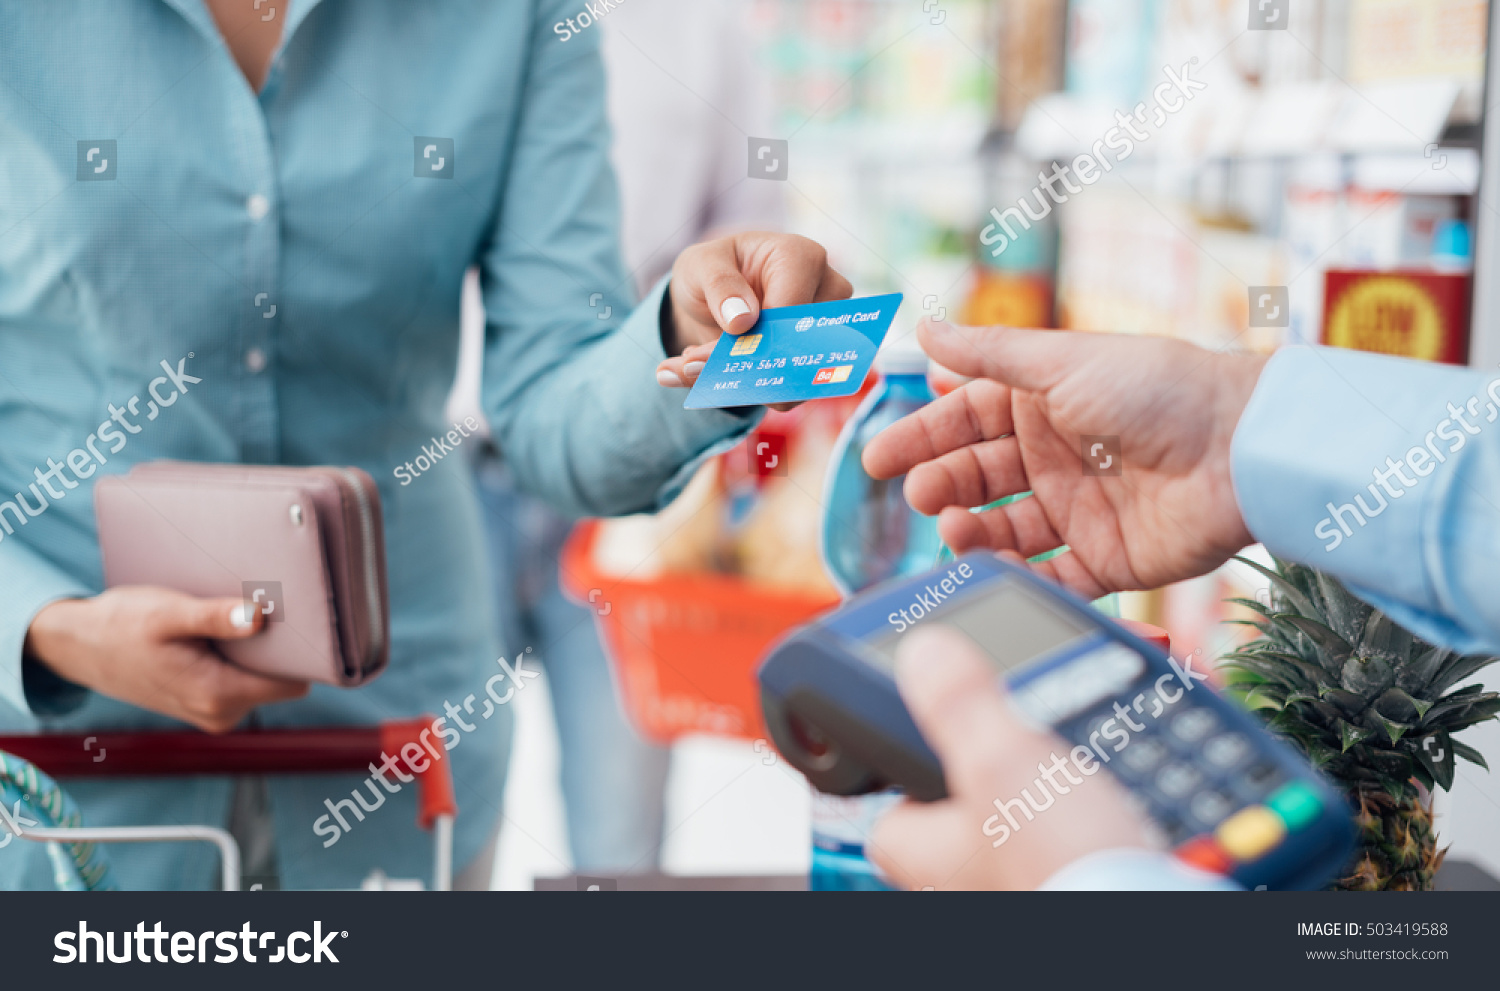 Woman at the supermarket checkout, she is paying using a credit card, shopping and retail concept #503419588